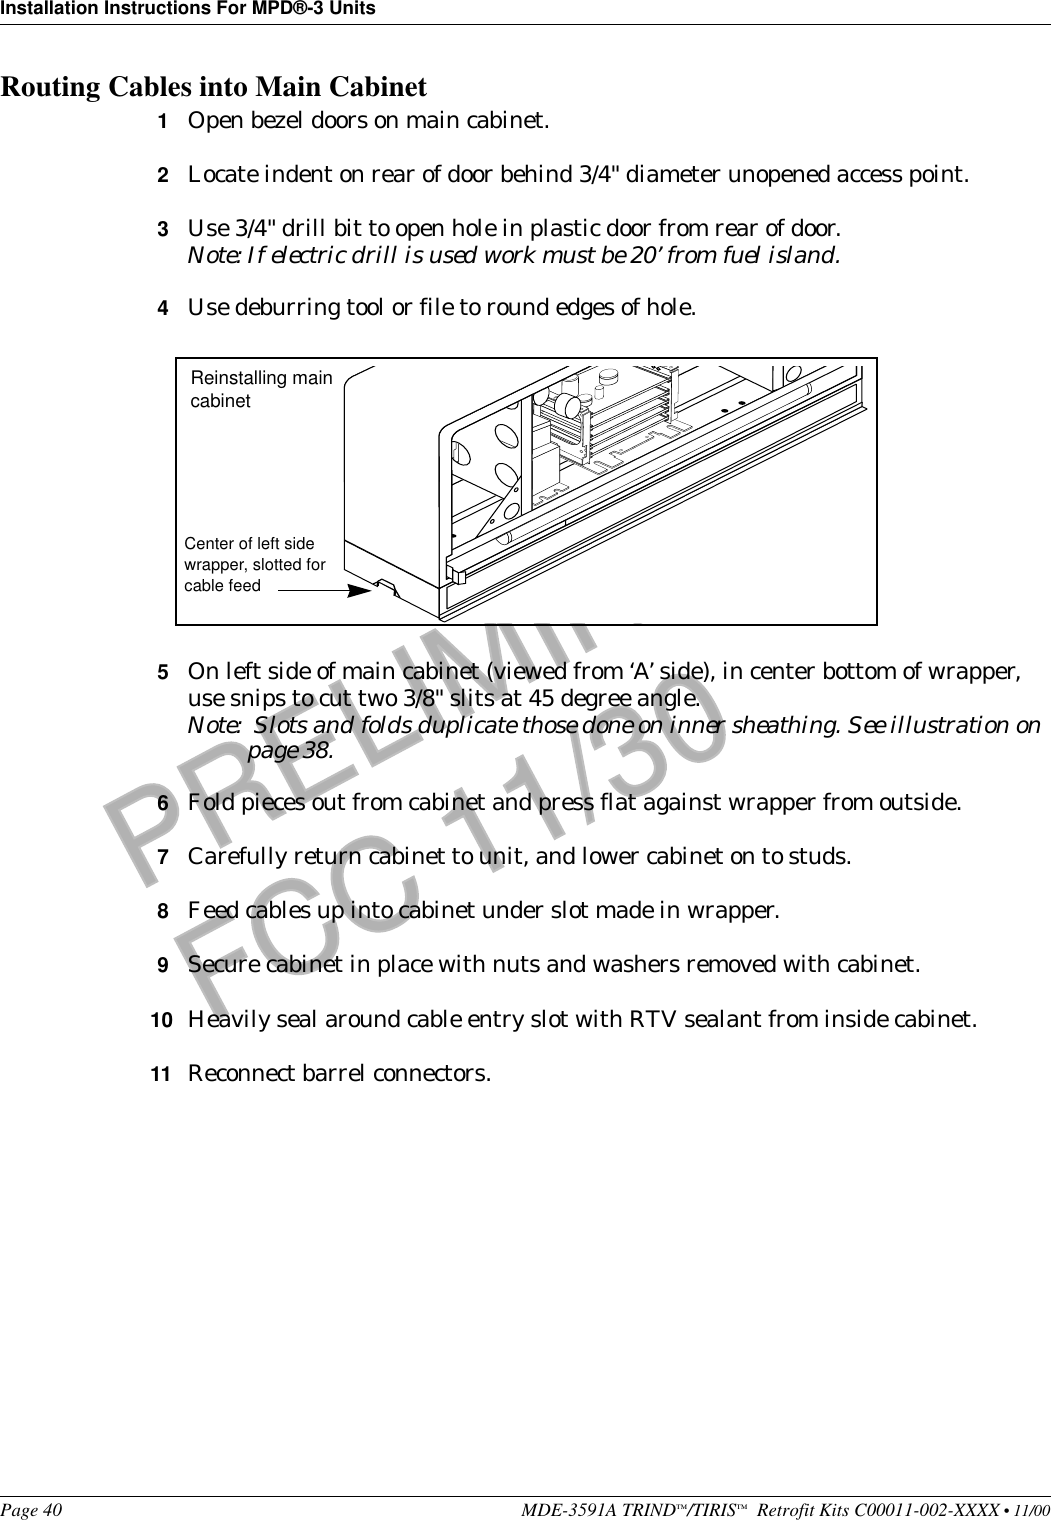 Installation Instructions For MPD®-3 UnitsPage 40 MDE-3591A TRIND™/TIRIS™  Retrofit Kits C00011-002-XXXX • 11/00PRELIMINARYFCC 11/30Routing Cables into Main Cabinet1Open bezel doors on main cabinet.2Locate indent on rear of door behind 3/4&quot; diameter unopened access point.3Use 3/4&quot; drill bit to open hole in plastic door from rear of door.Note: If electric drill is used work must be 20’ from fuel island.4Use deburring tool or file to round edges of hole.5On left side of main cabinet (viewed from ‘A’ side), in center bottom of wrapper, use snips to cut two 3/8&quot; slits at 45 degree angle.Note:  Slots and folds duplicate those done on inner sheathing. See illustration on page 38.6Fold pieces out from cabinet and press flat against wrapper from outside.7Carefully return cabinet to unit, and lower cabinet on to studs.8Feed cables up into cabinet under slot made in wrapper.9Secure cabinet in place with nuts and washers removed with cabinet.10 Heavily seal around cable entry slot with RTV sealant from inside cabinet.11 Reconnect barrel connectors.Center of left side wrapper, slotted for cable feedReinstalling main cabinet